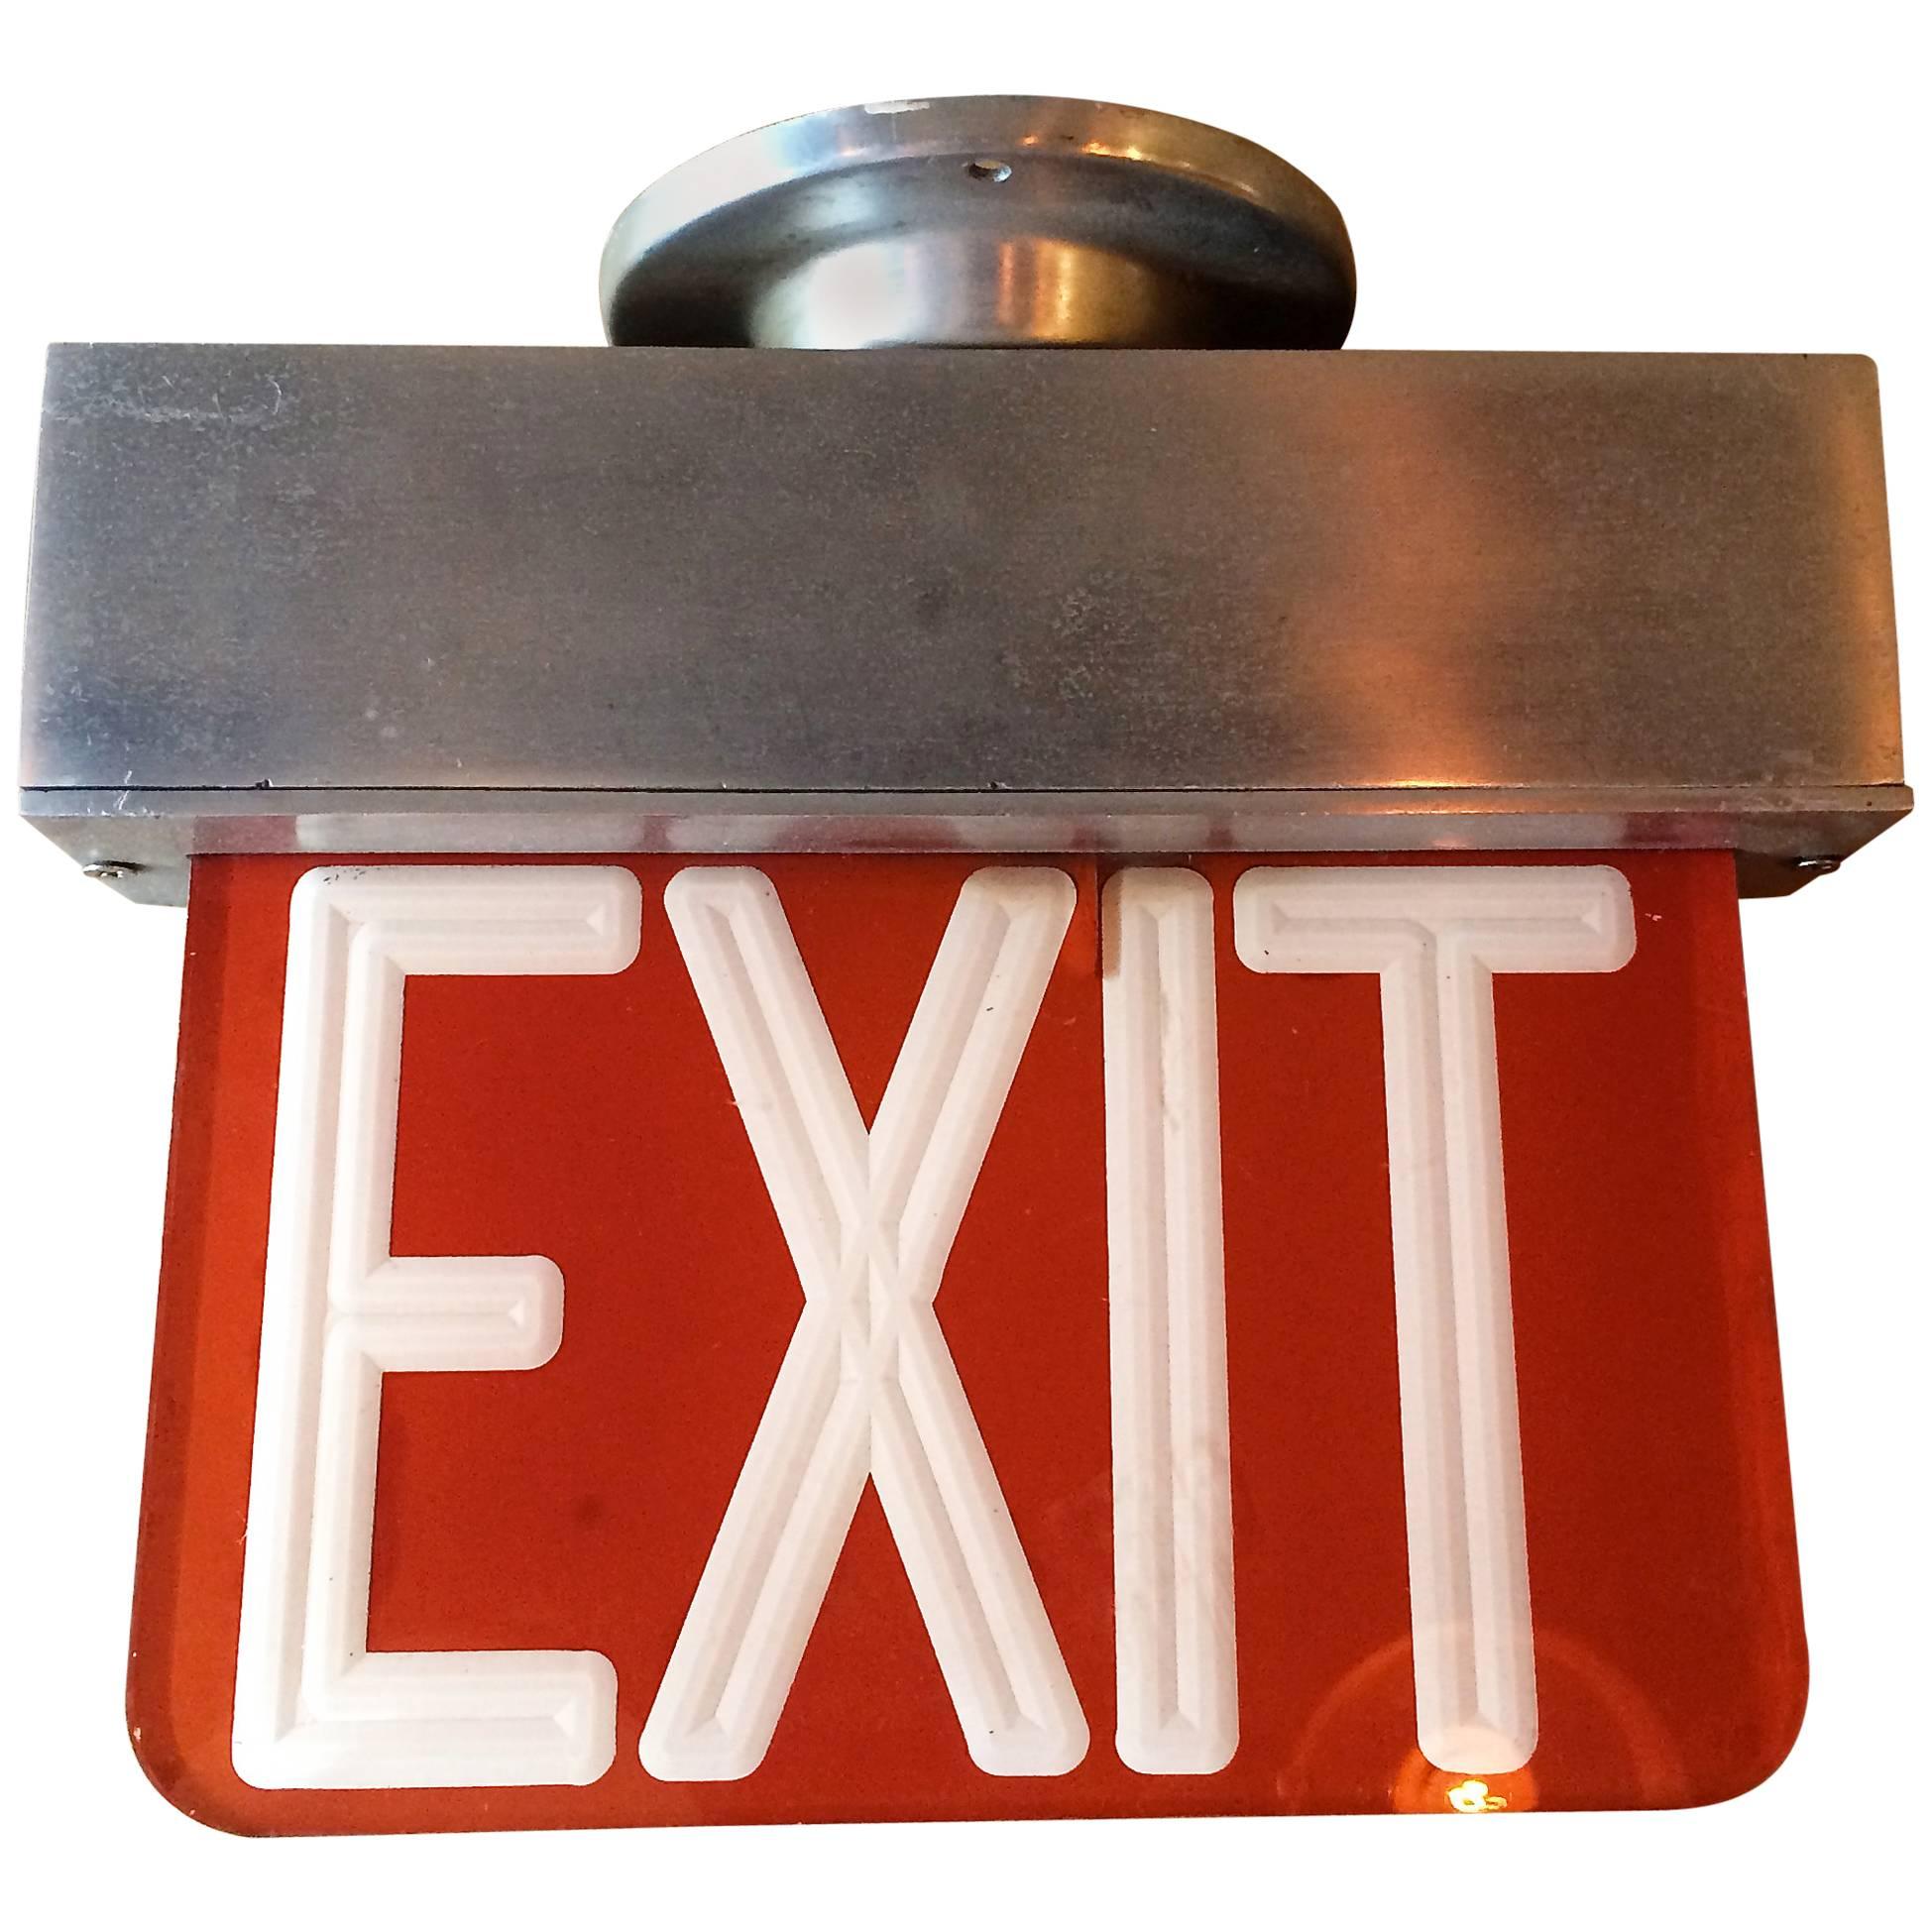 Double-Sided Ceiling Flush Mount Exit Sign Light